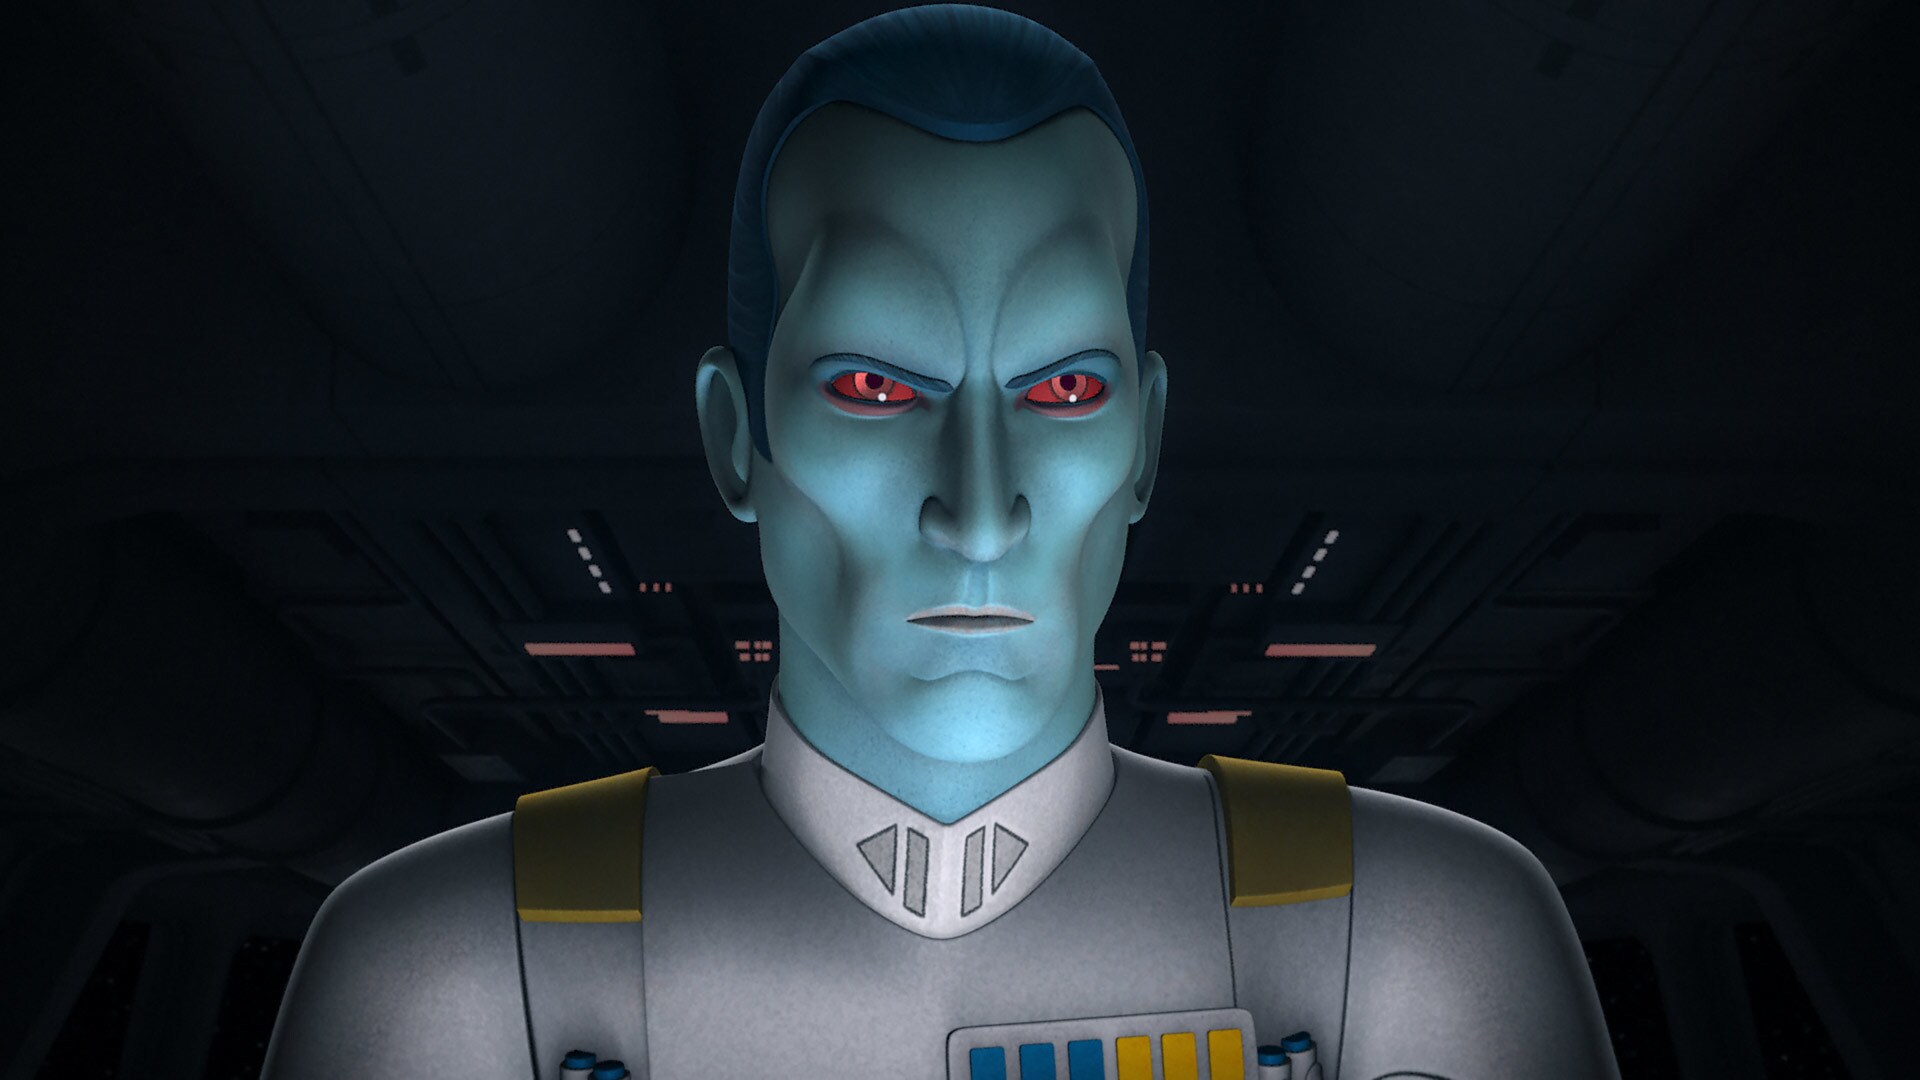 Hera weaves through the Empire's forces, making the jump to lightspeed. Thrawn is not pleased.